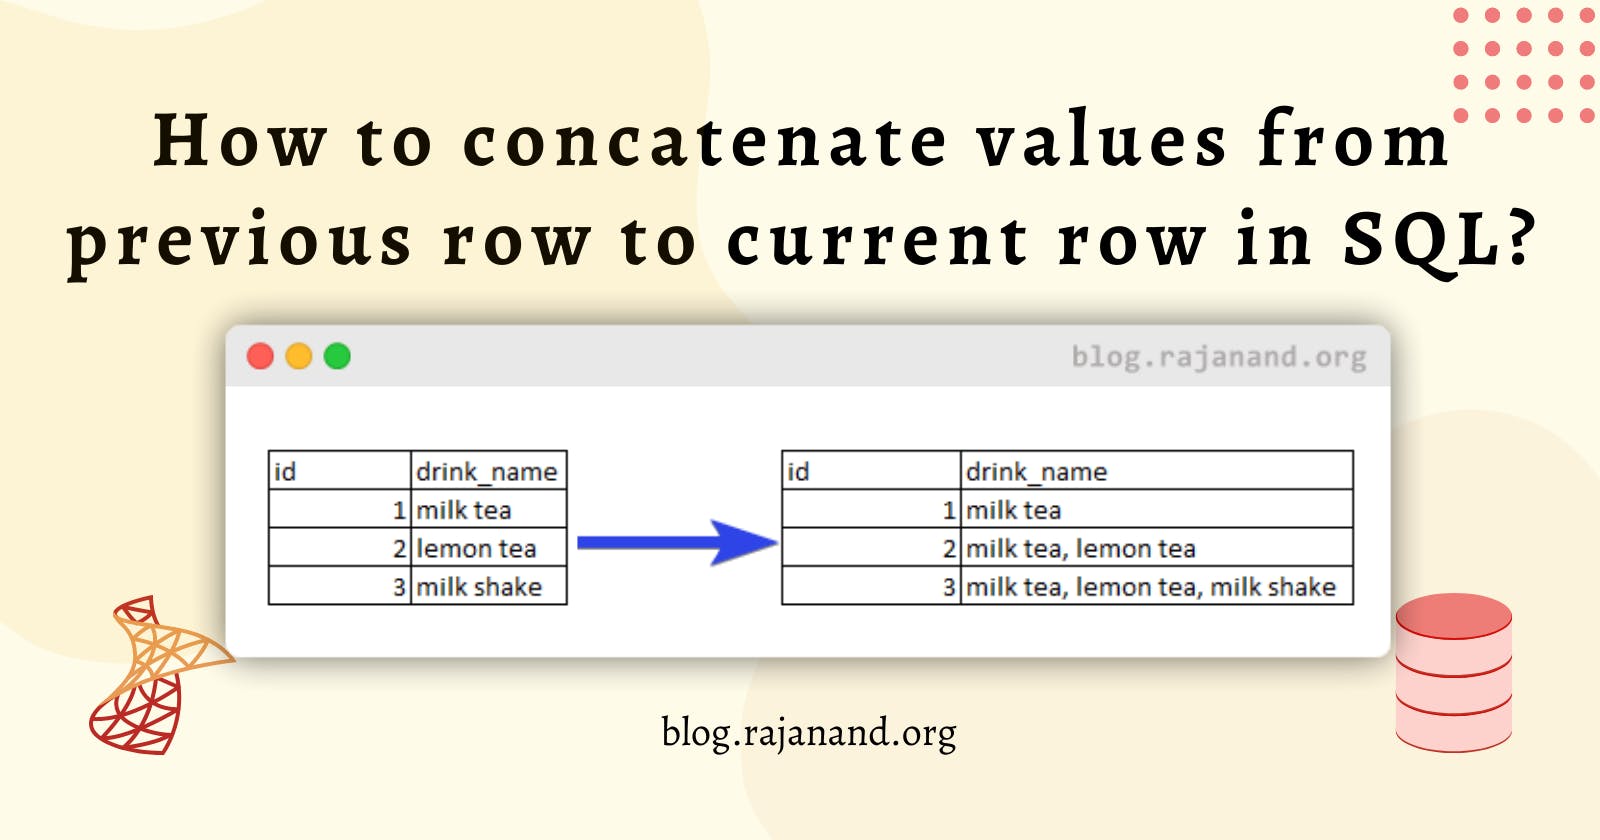 How to concatenate values from previous row to current row in SQL?